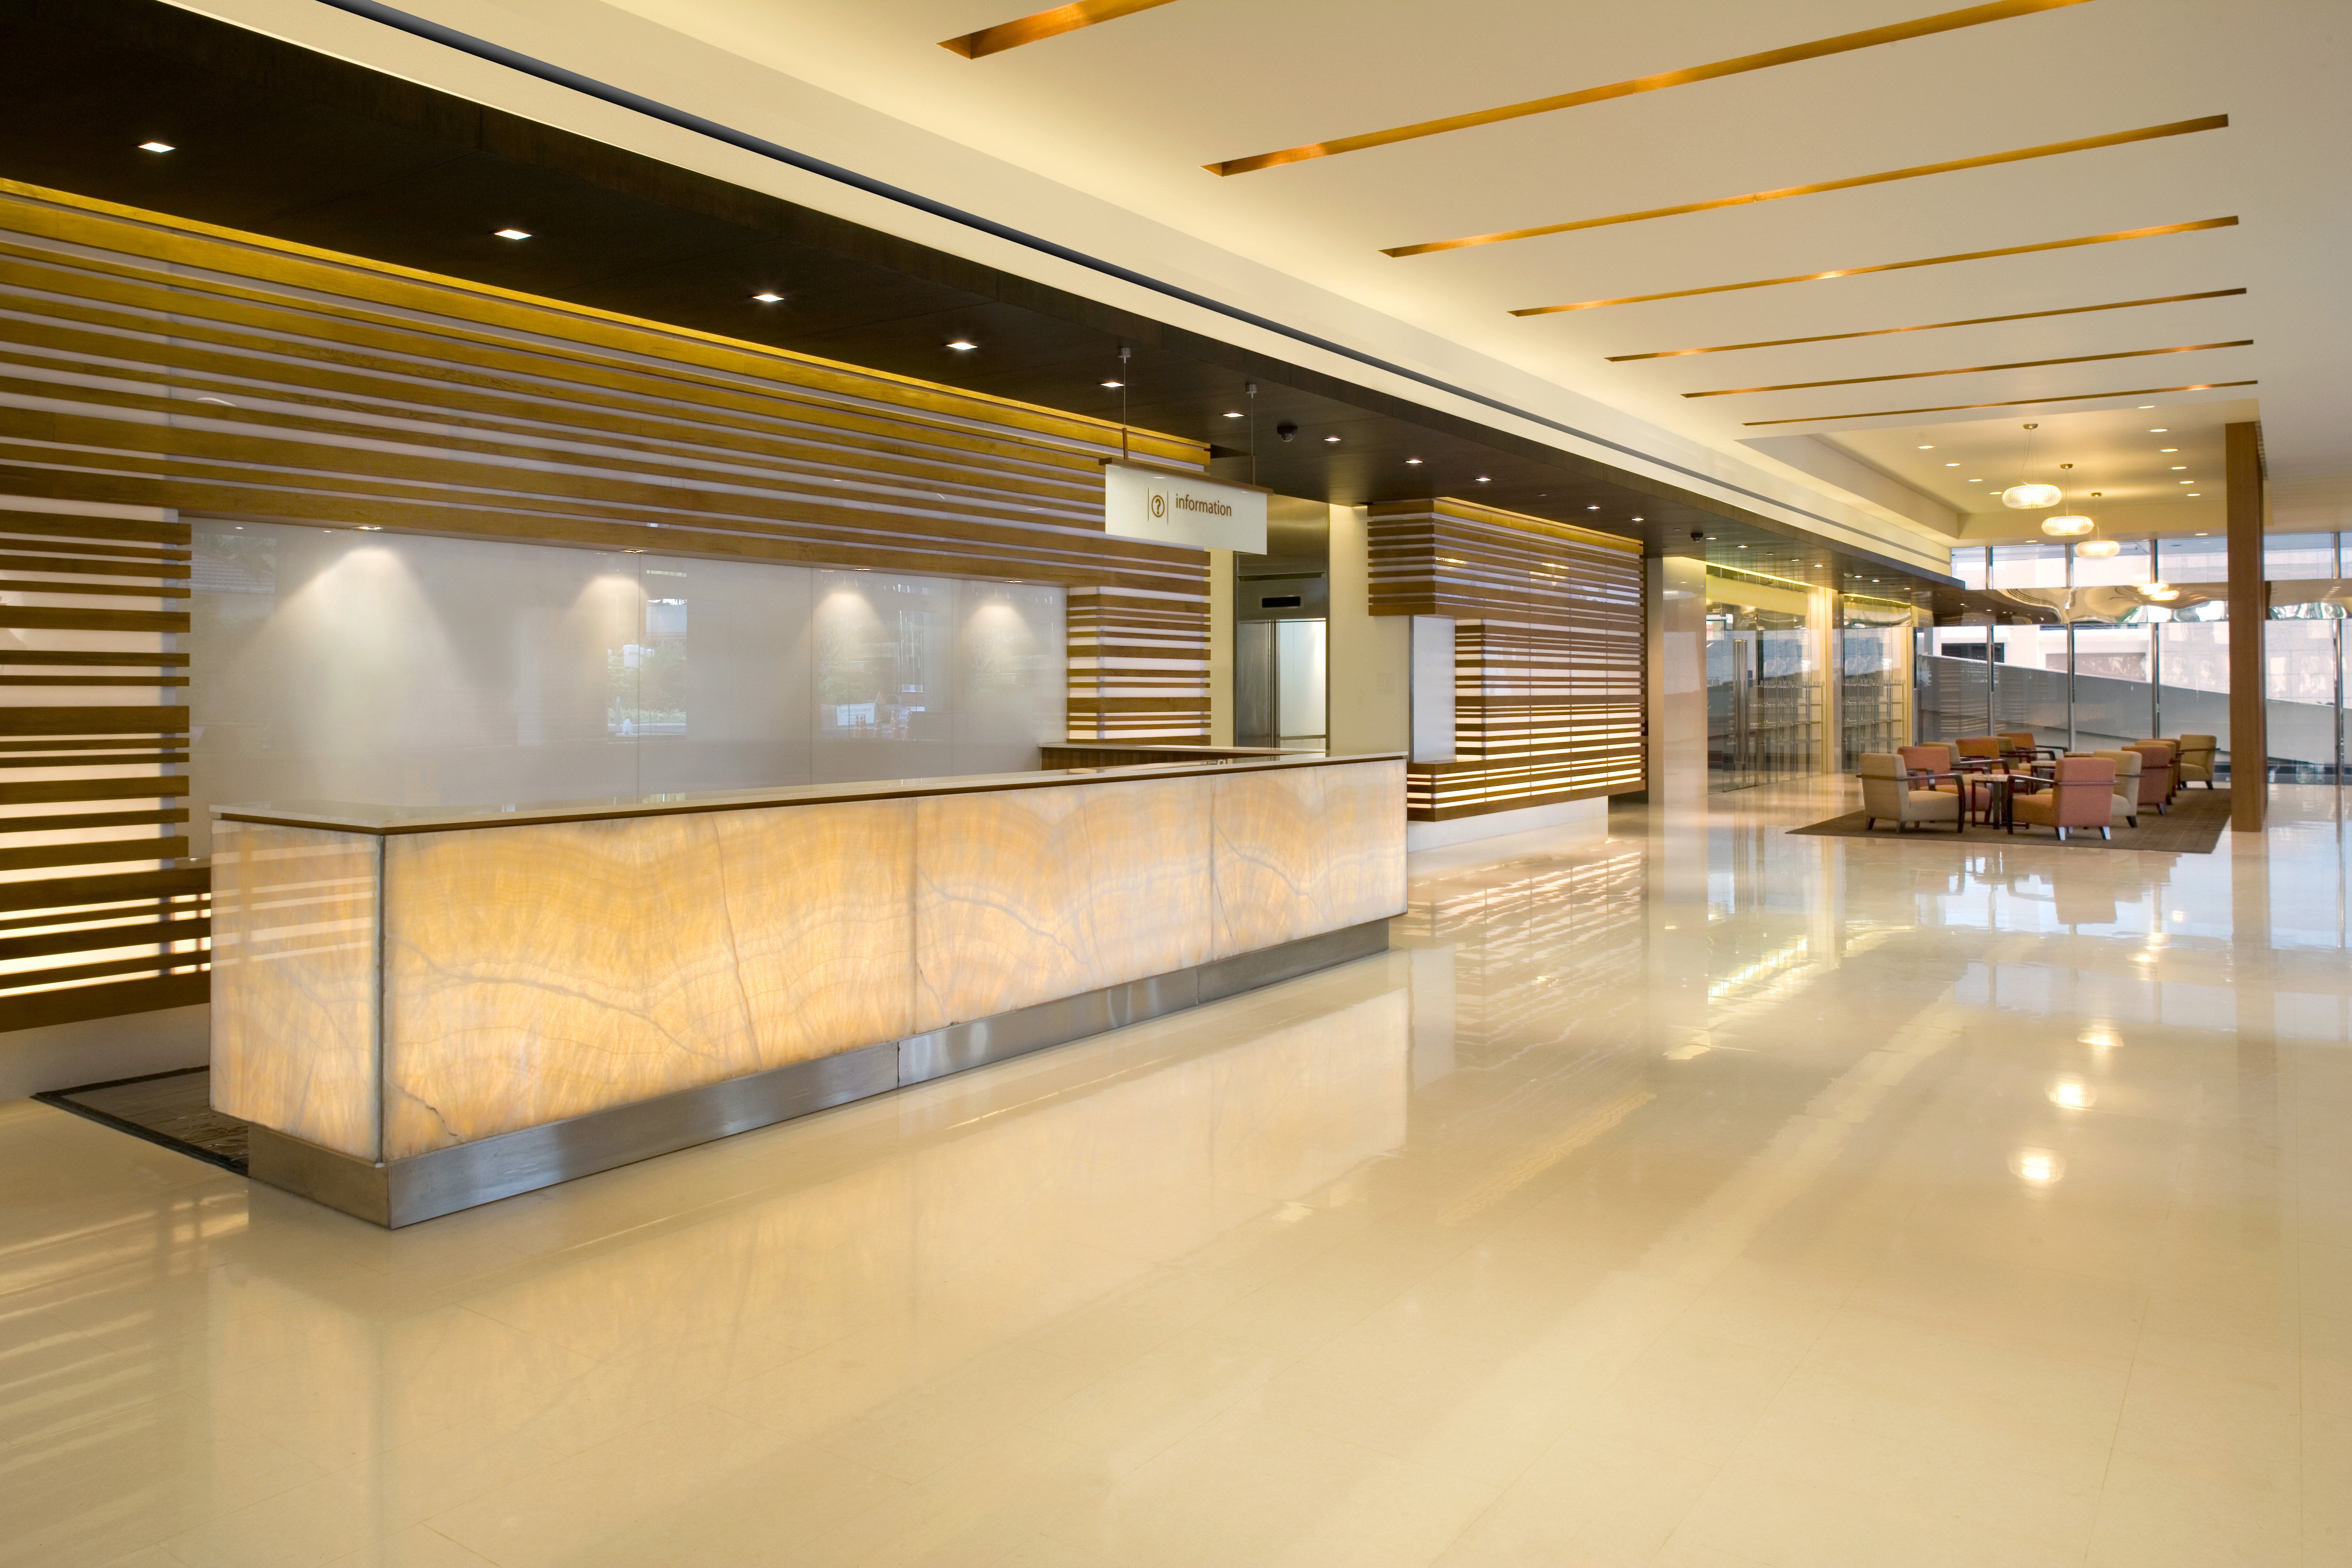 Hotel lobby with linear slot diffuser installed in bulkhead above reception desk